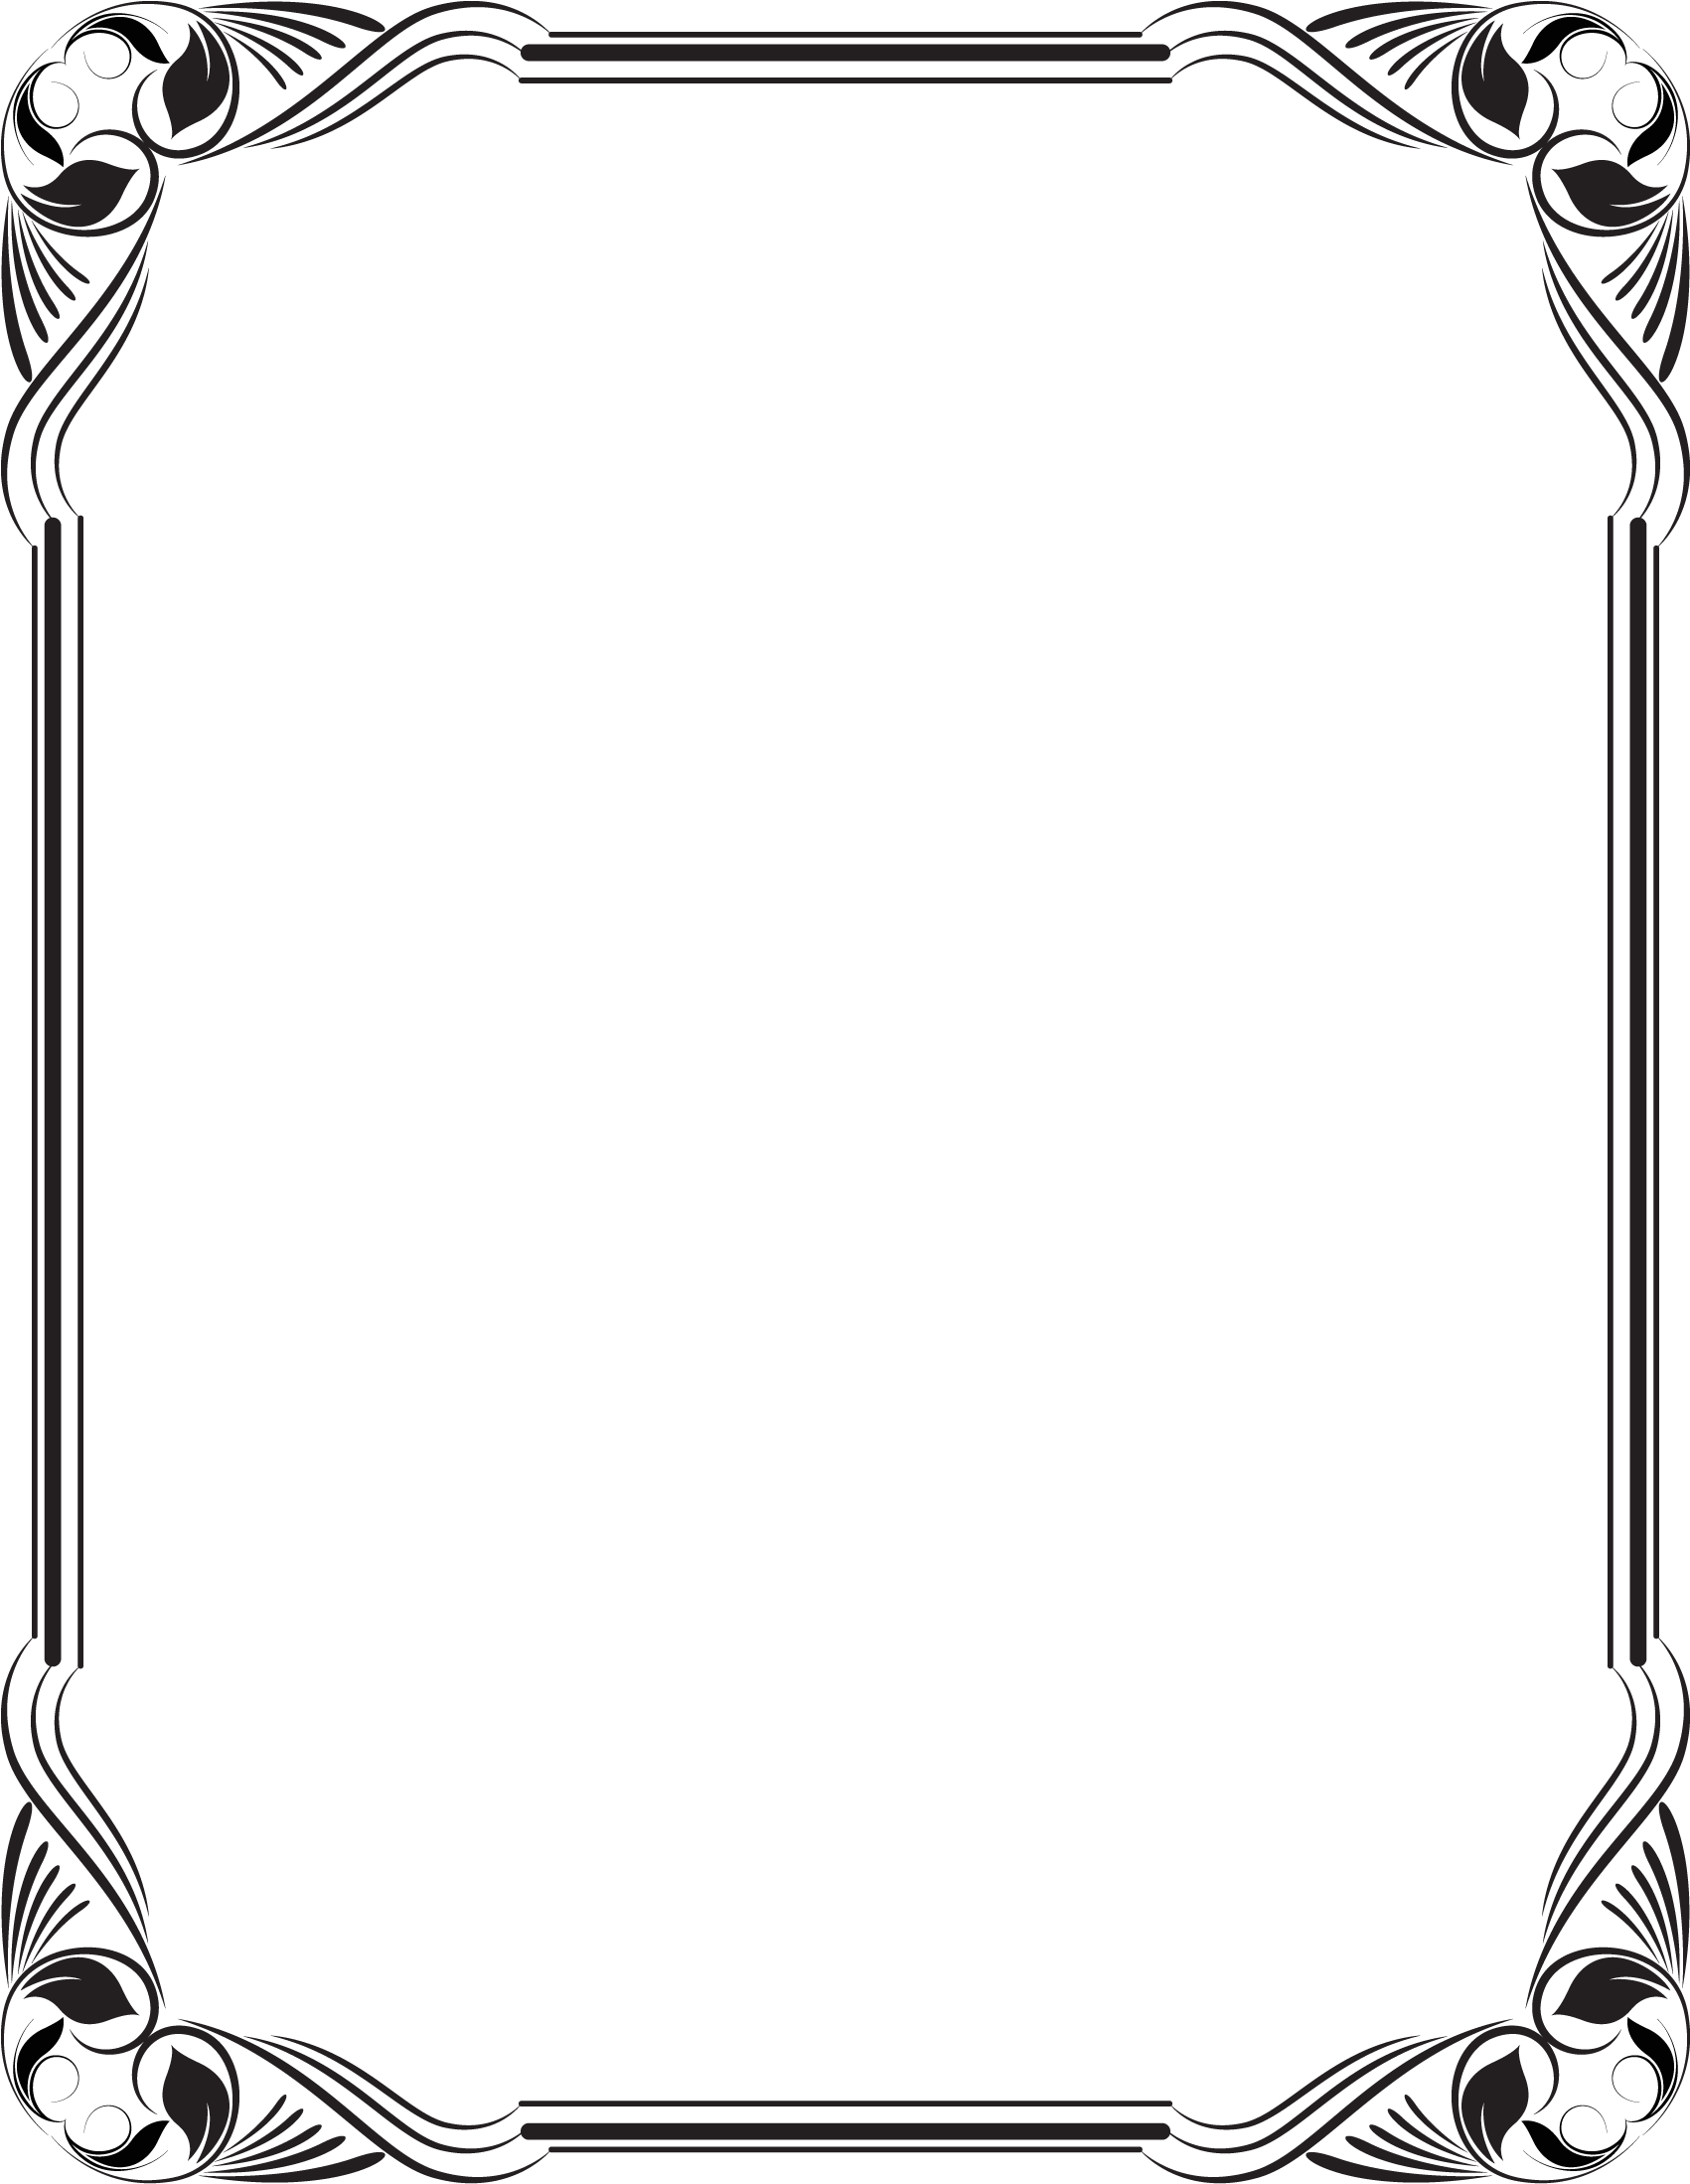 Download Stencil Borders For Paper, Borders And Frames, Frame - Black And White  Frame Borders Design PNG Image with No Background 